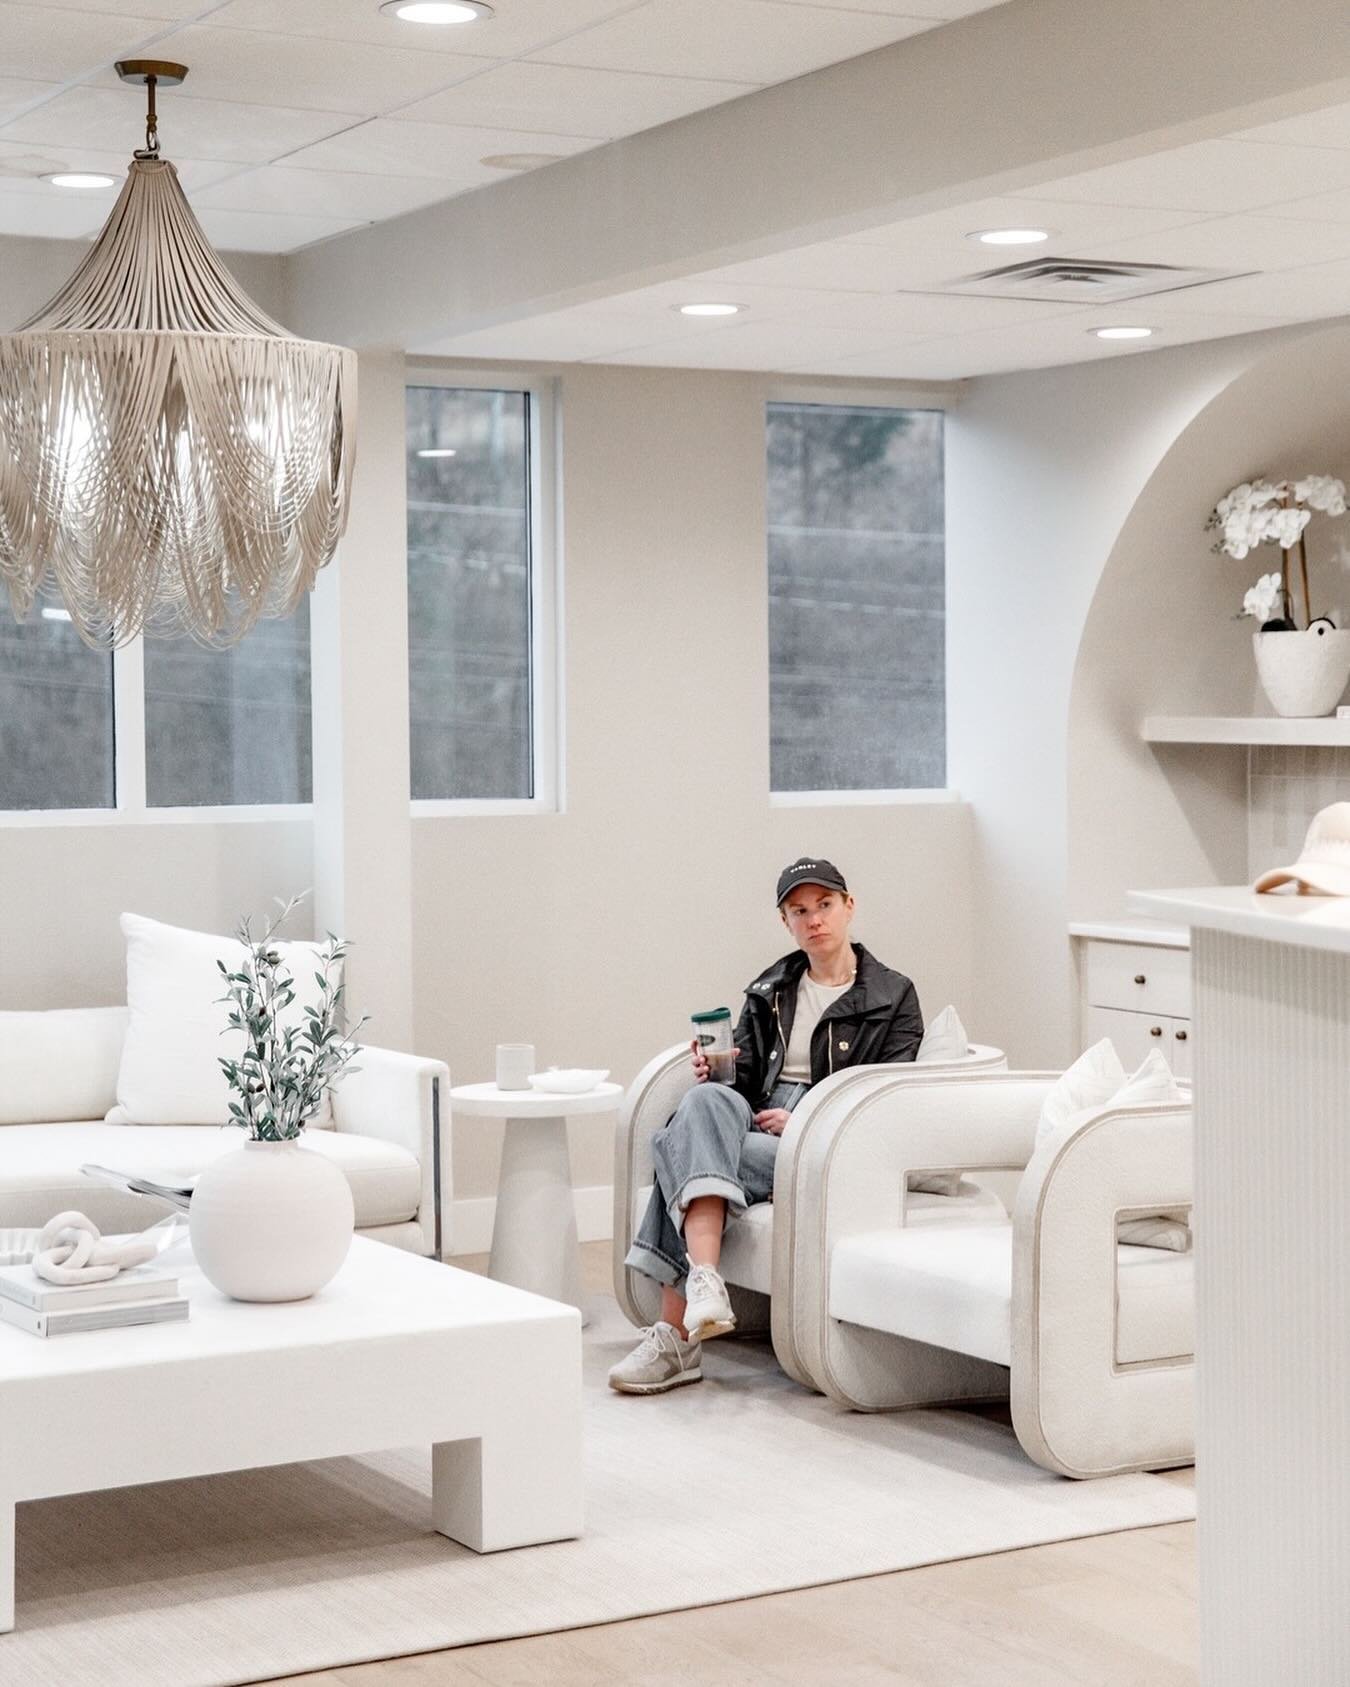 This could be you, sipping your coffee waiting in our gorgeous lobby, waiting to get treated ✨ ️ This is your reminder to schedule your appointment with us! May is the perfect time to get your neurotoxin done&hellip; raise your hands if you want no w